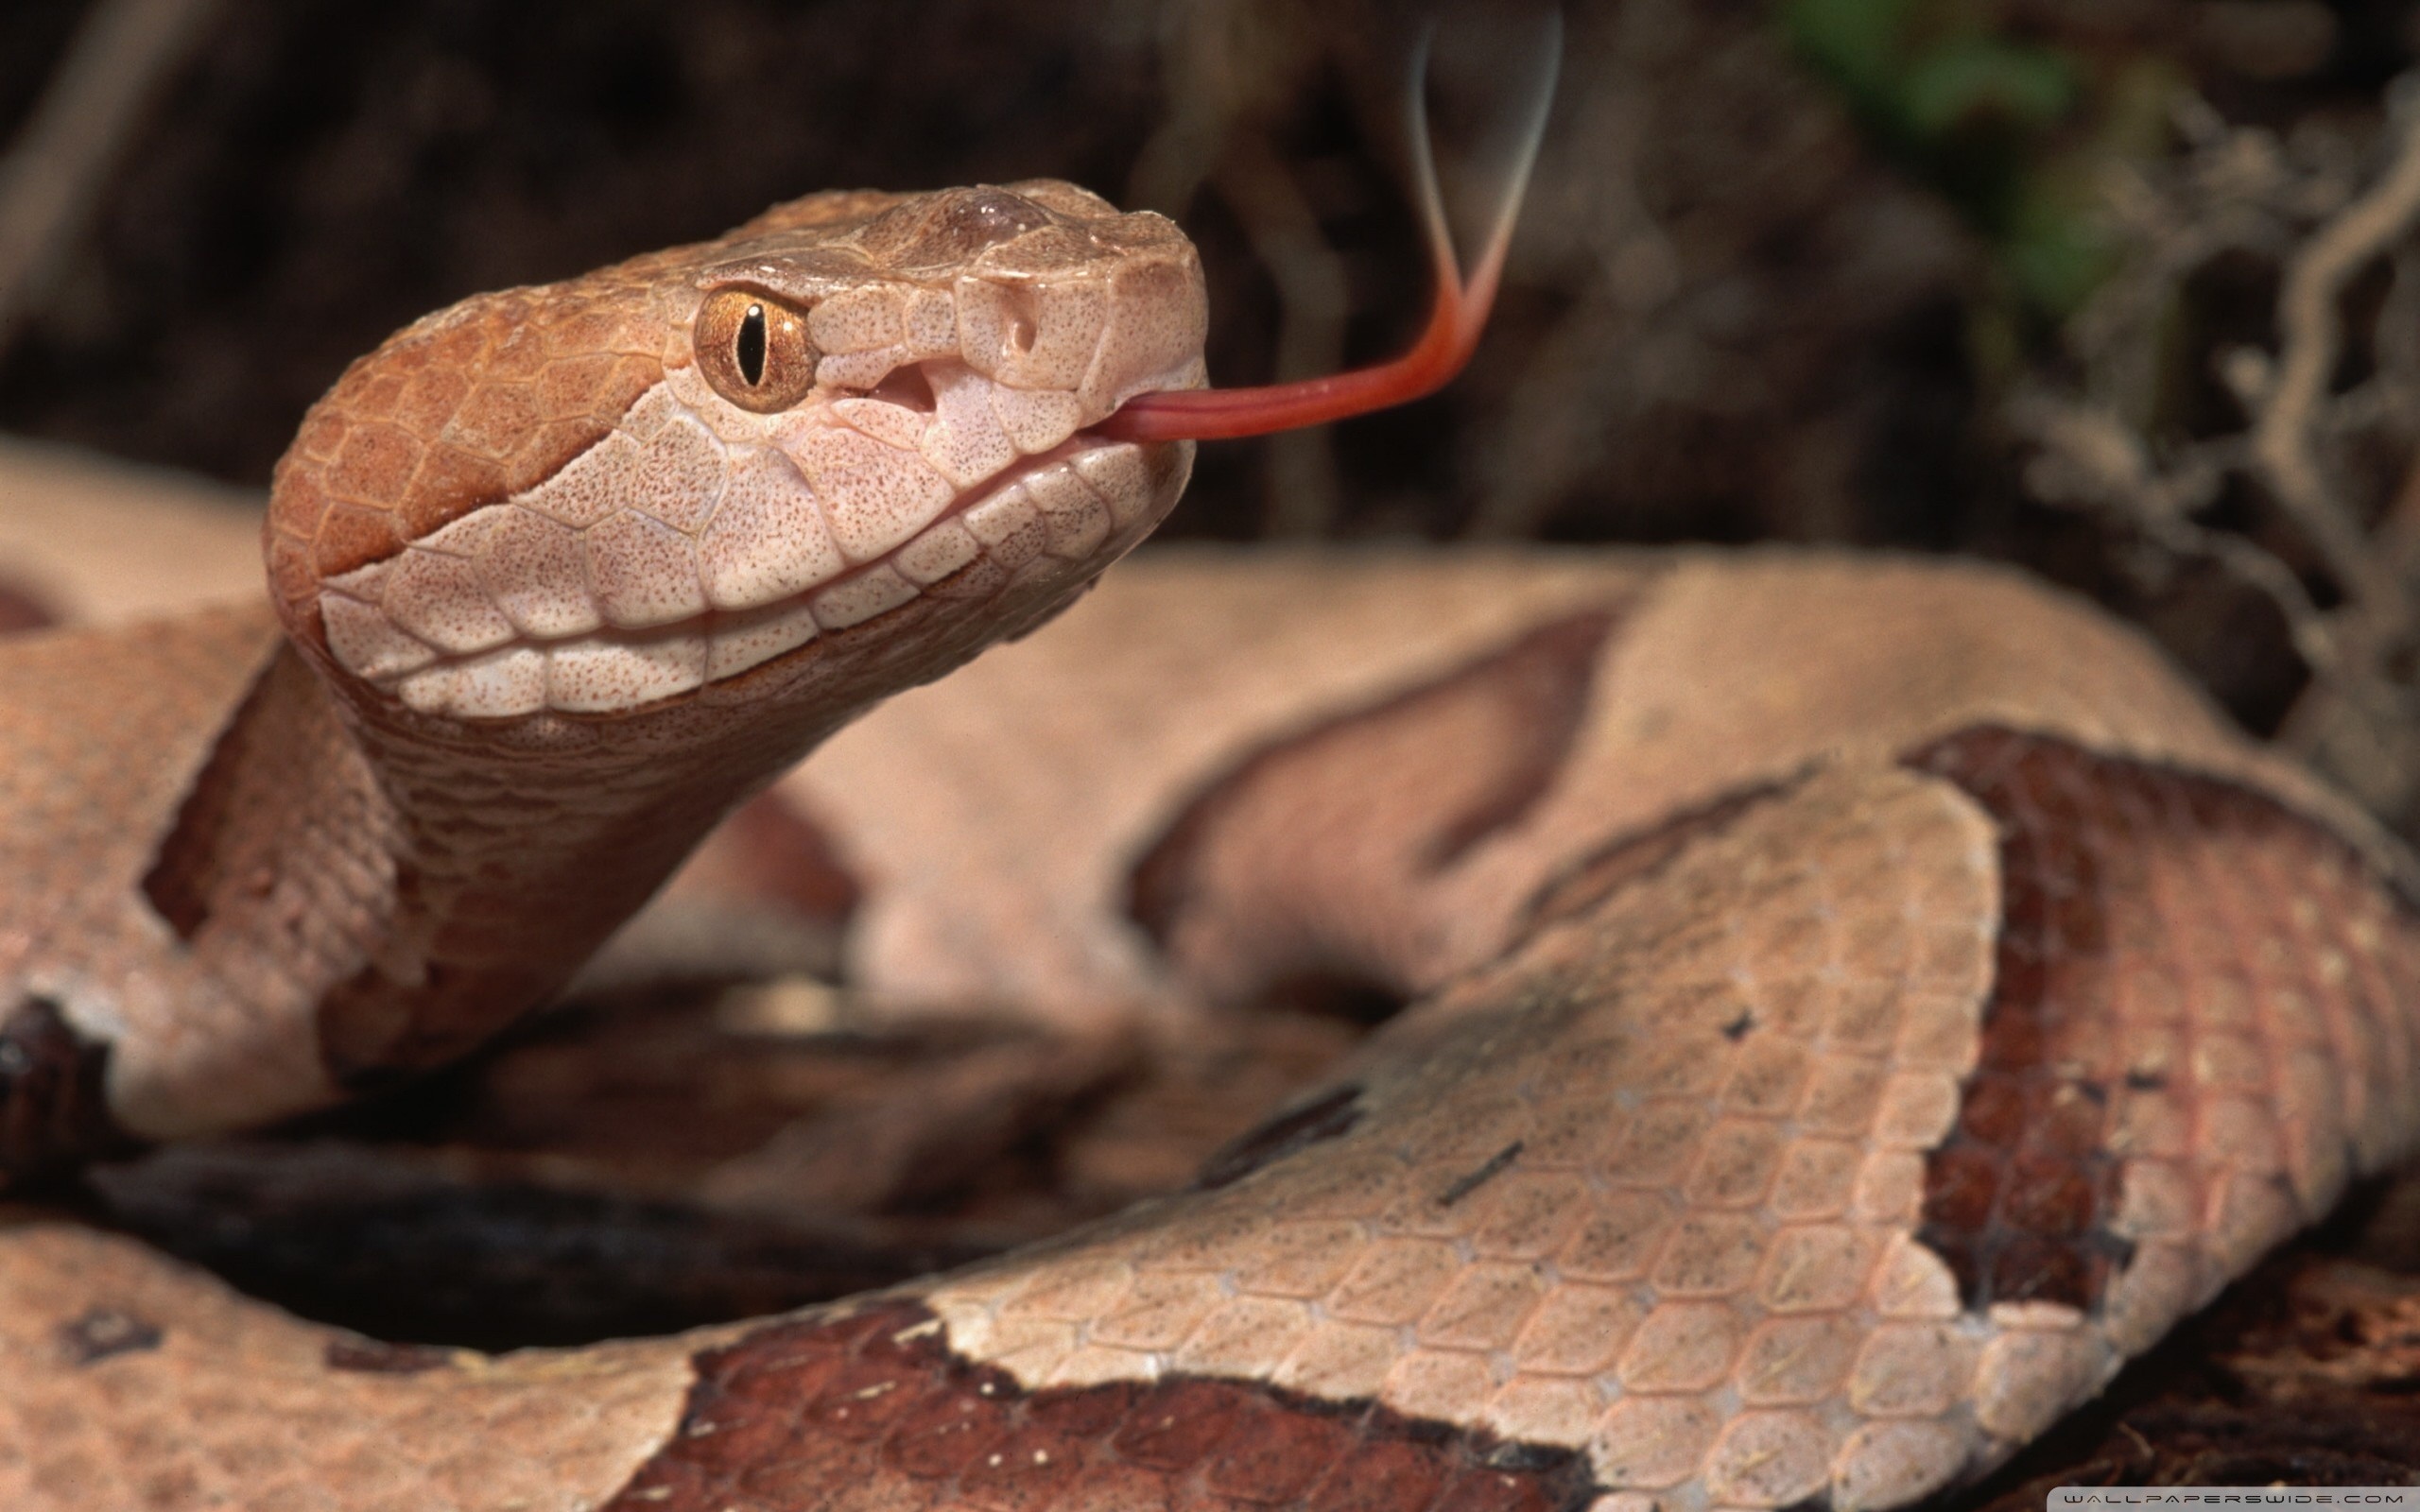 General 2560x1600 reptiles vipers animals Copperhead snake closeup watermarked